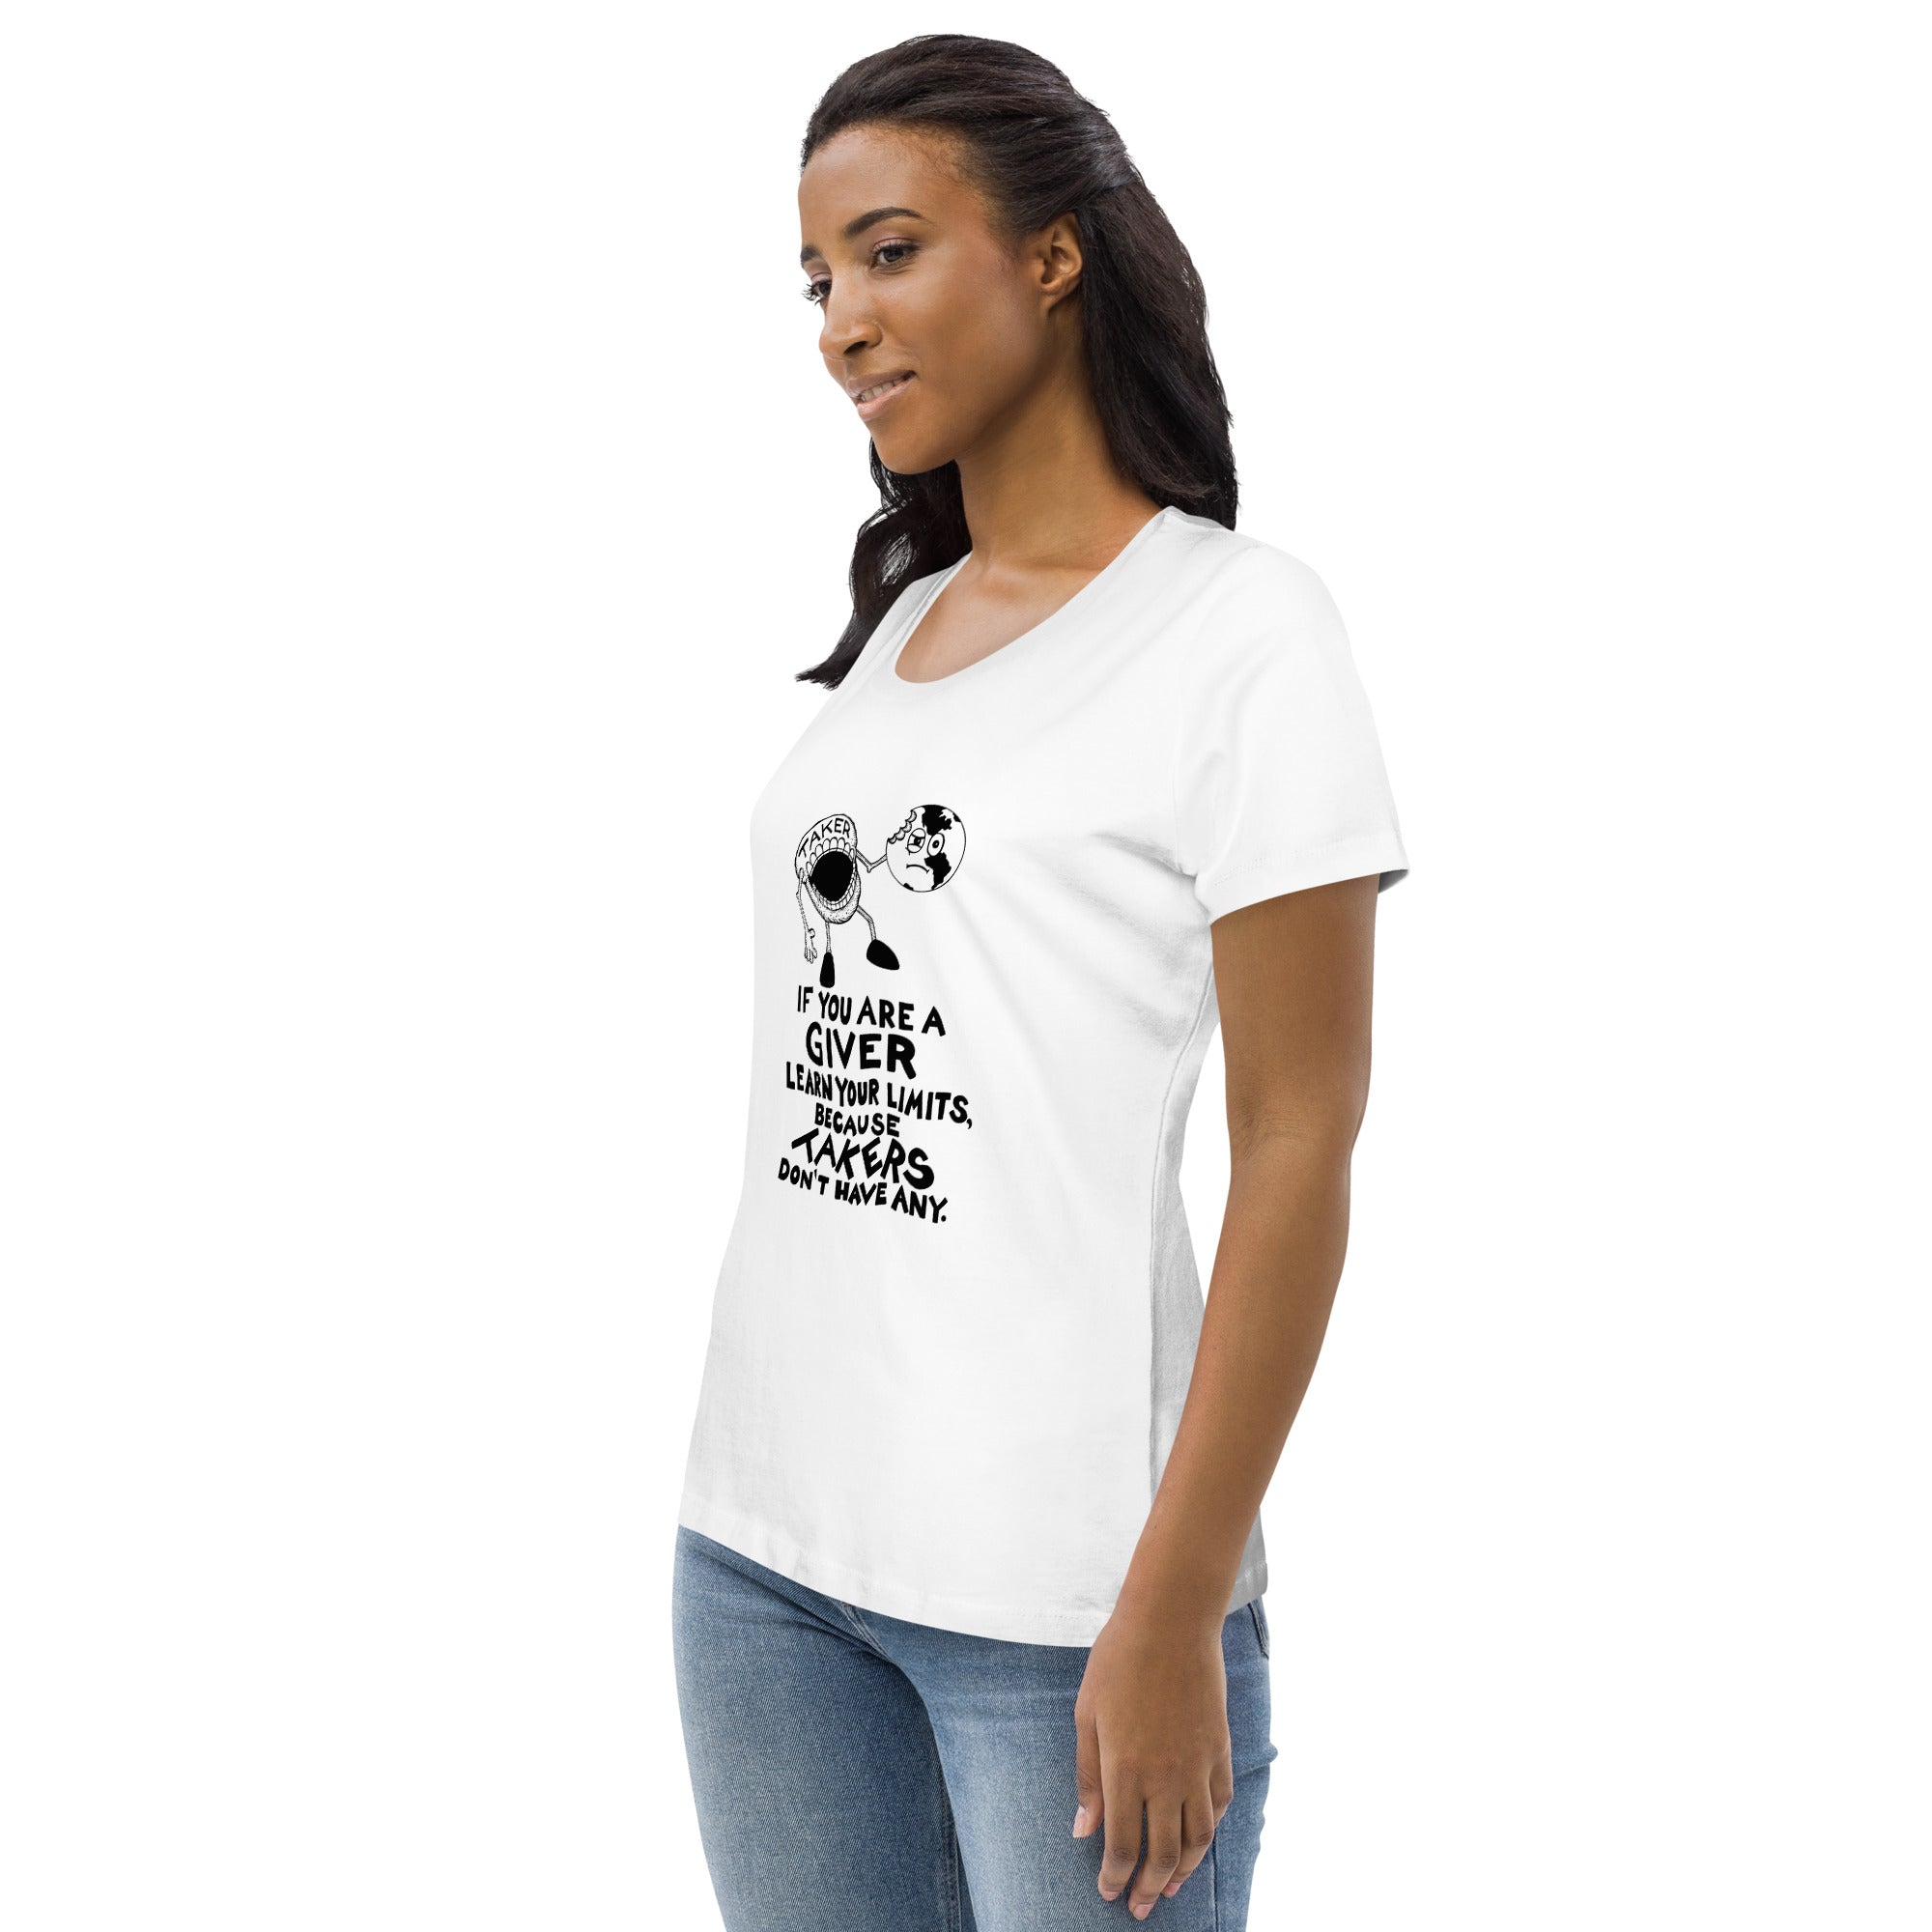 The Taker Organic Cotton Scoop Neck T-Shirt In White By Artist Rick Frausto